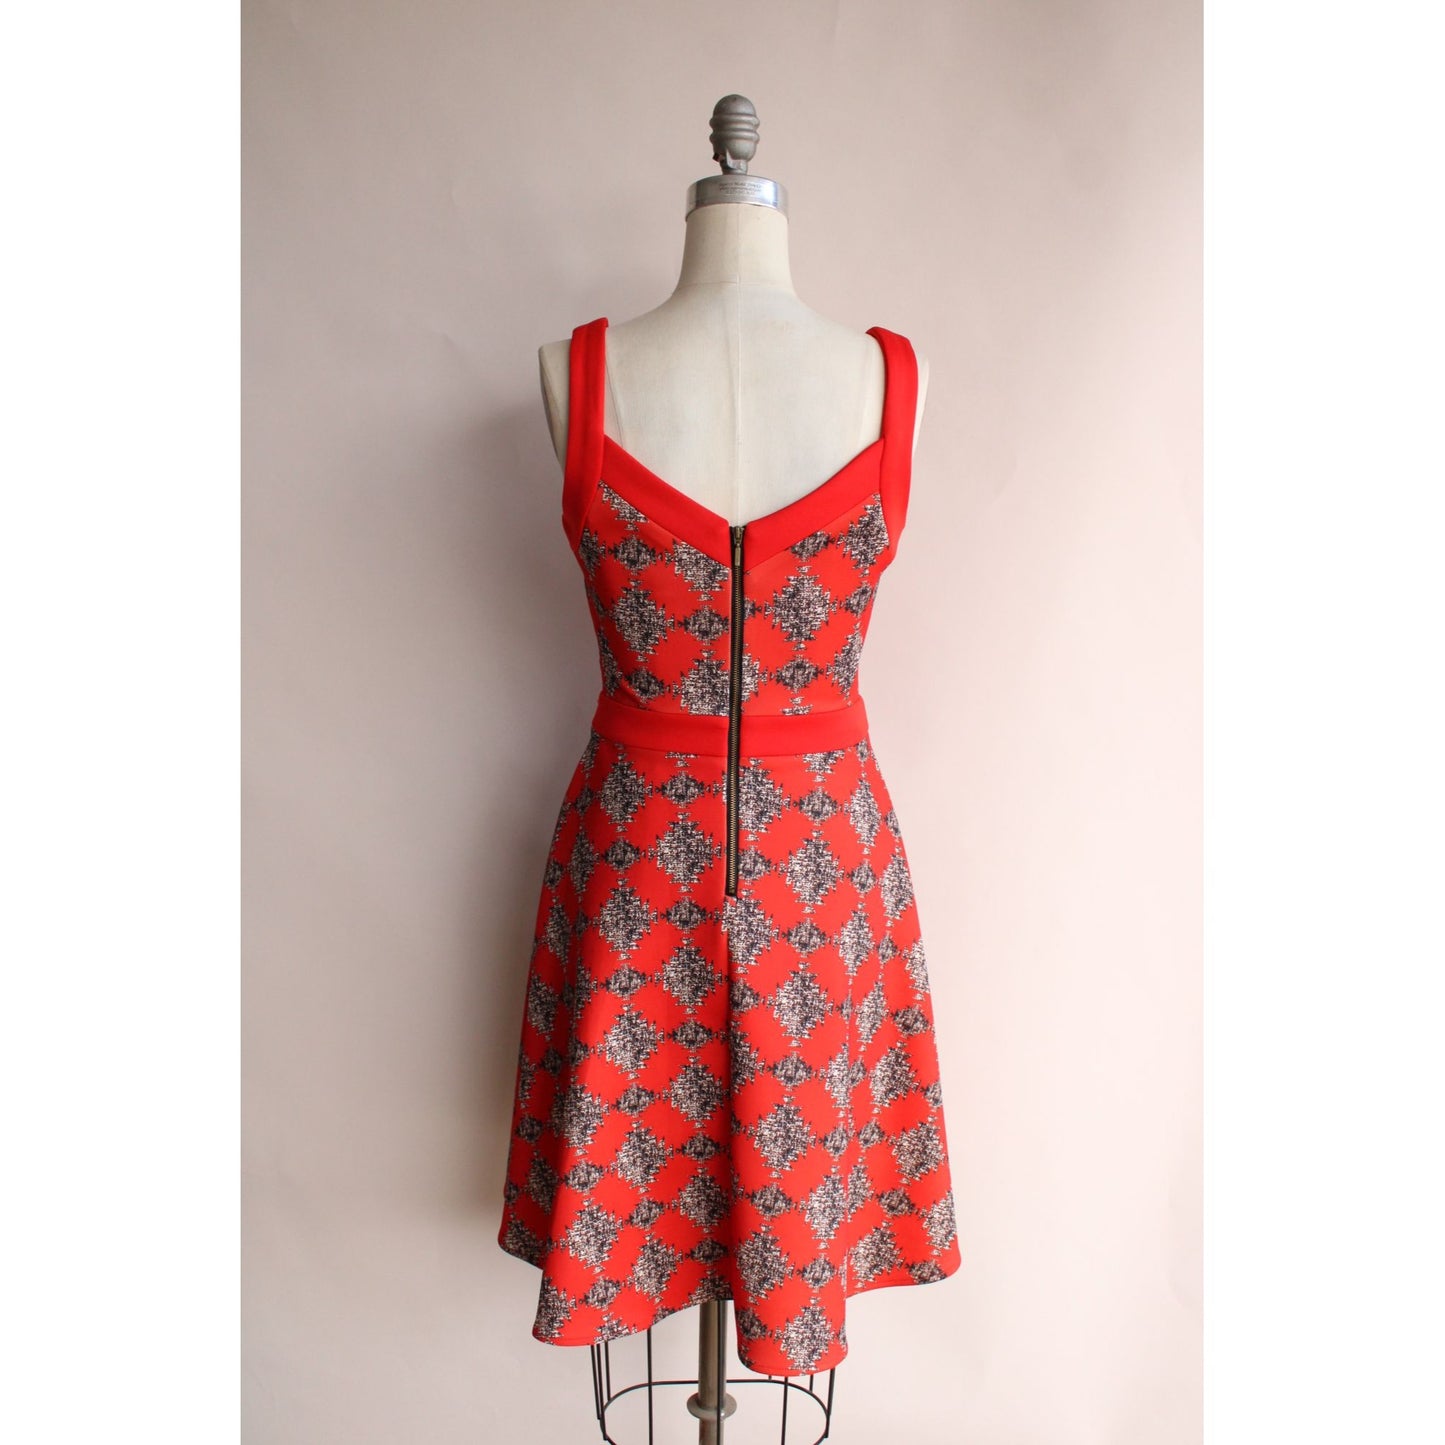 XoXo dress, Size Small, red geometric print, fit and flare